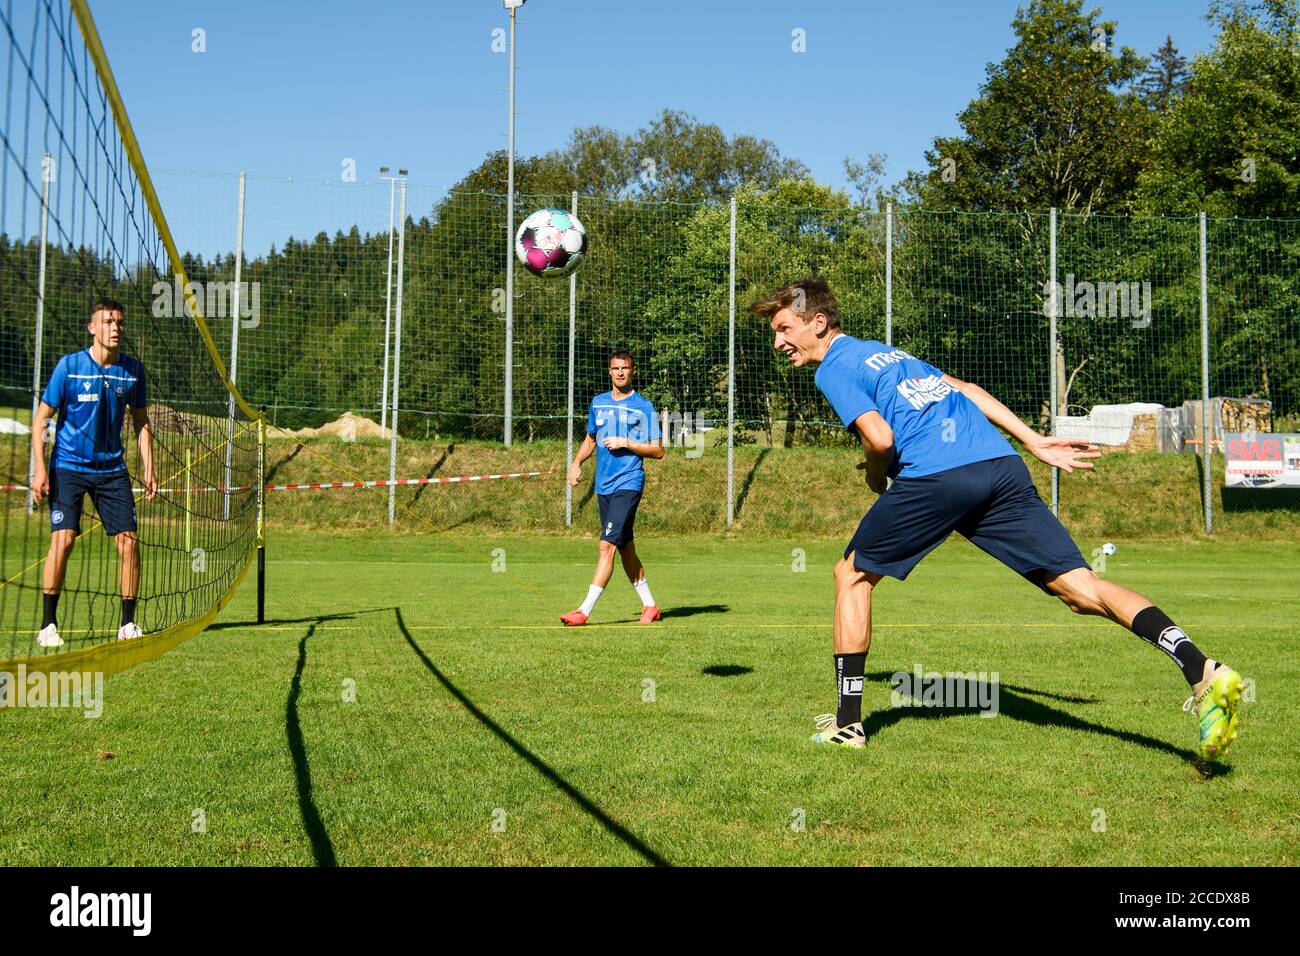 Janis Hanek (KSC), Philip Heise (KSC), Benjamin Goller (KSC) on the ball. (From left). The training session on afterwithtag takes place on a field in Vorderweissach, where the KSC plays football tennis for a change. GES/Football/2. Bundesliga: Karlsruher SC - training camp, August 21, 2020 Football/Soccer: 2. Bundesliga: KSC training camp, Bad Leonfelden, Austria, August 21, 2020 | usage worldwide Stock Photo